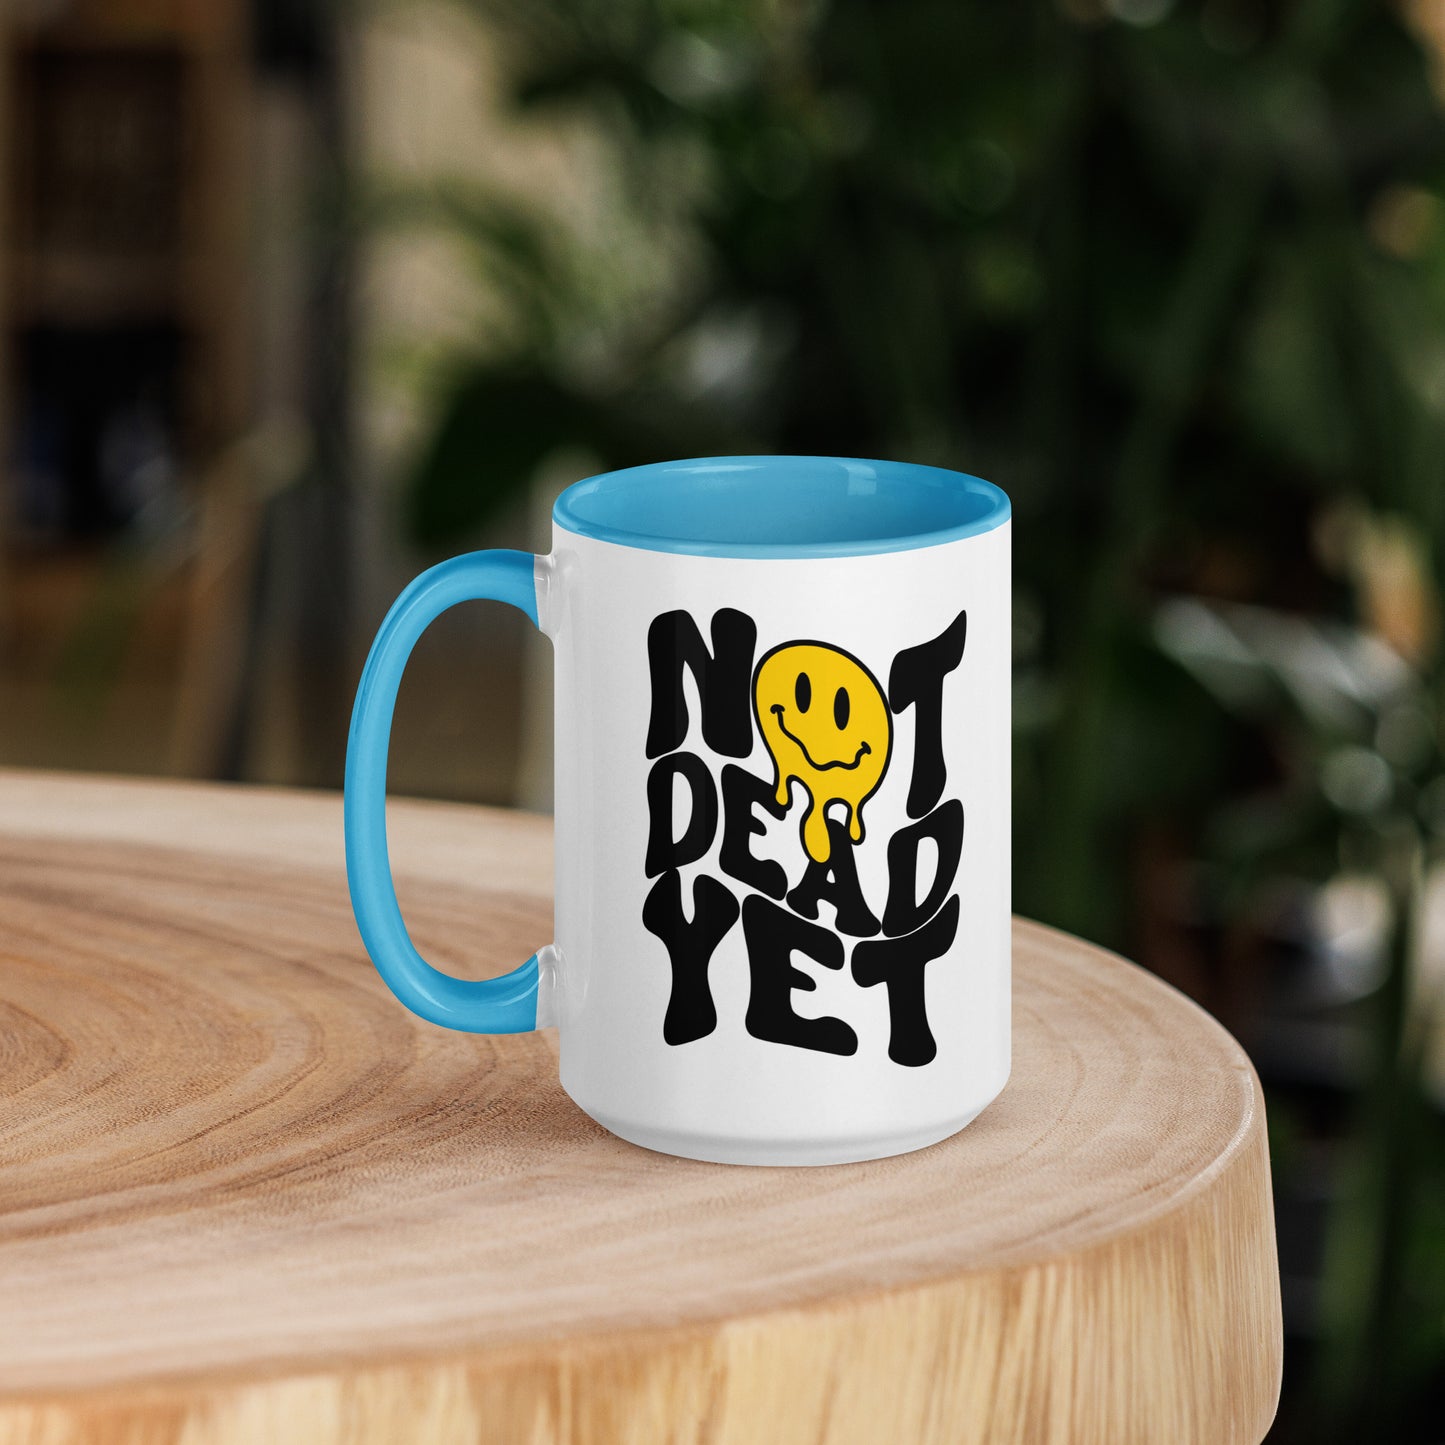 Not Dead Yet Colored Mug